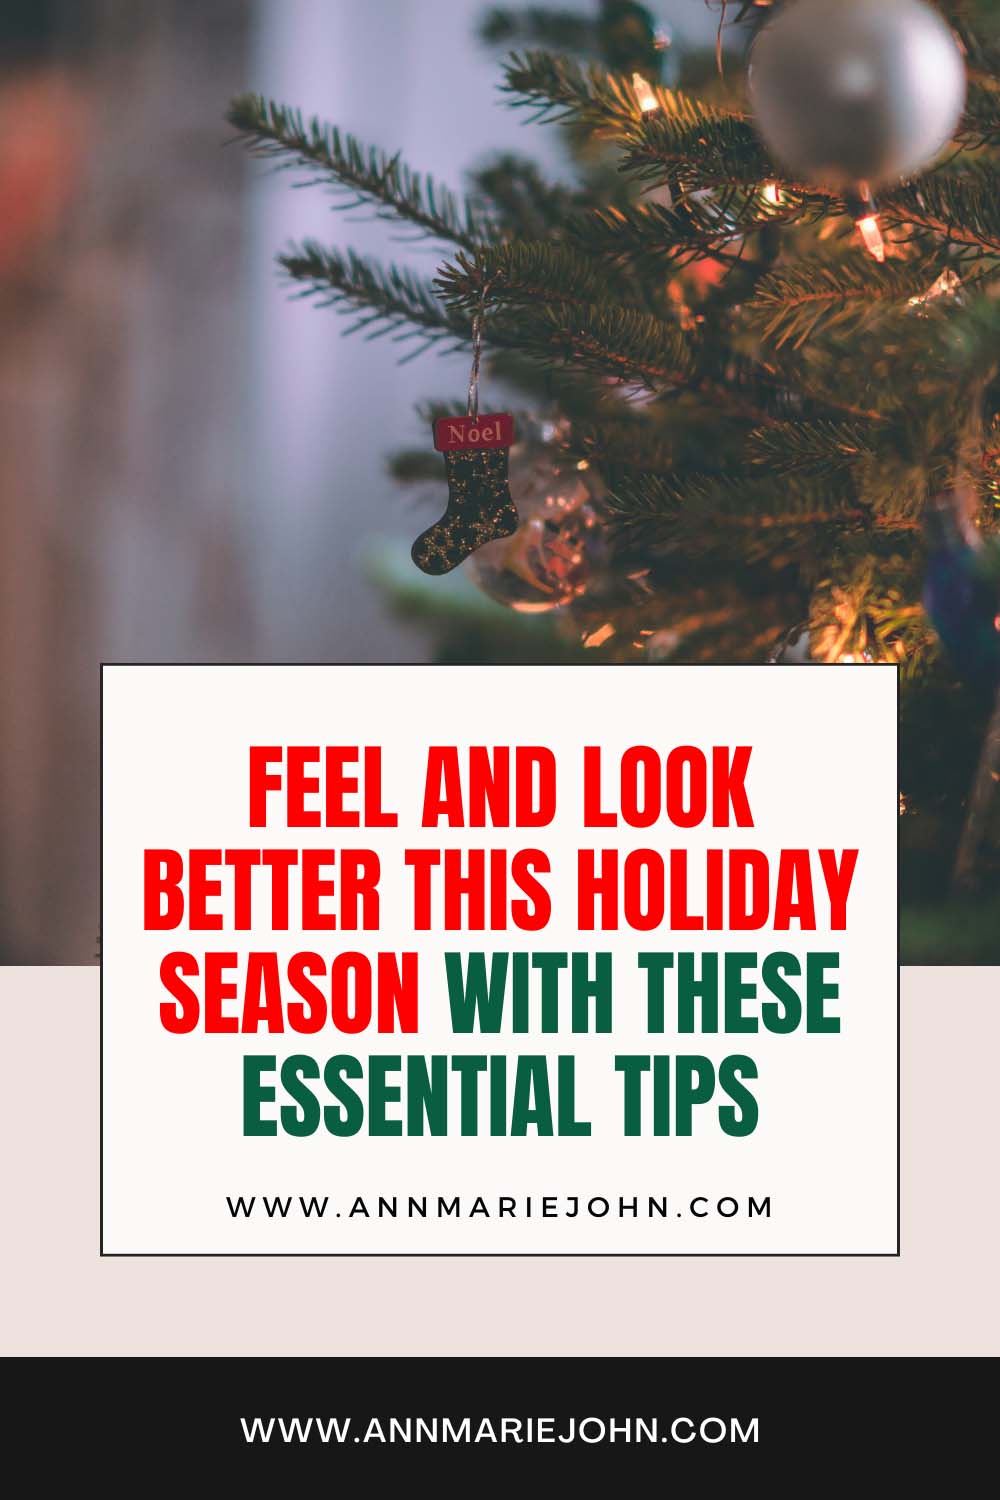 Feel and Look Better This Holiday Season with These Essential Tips